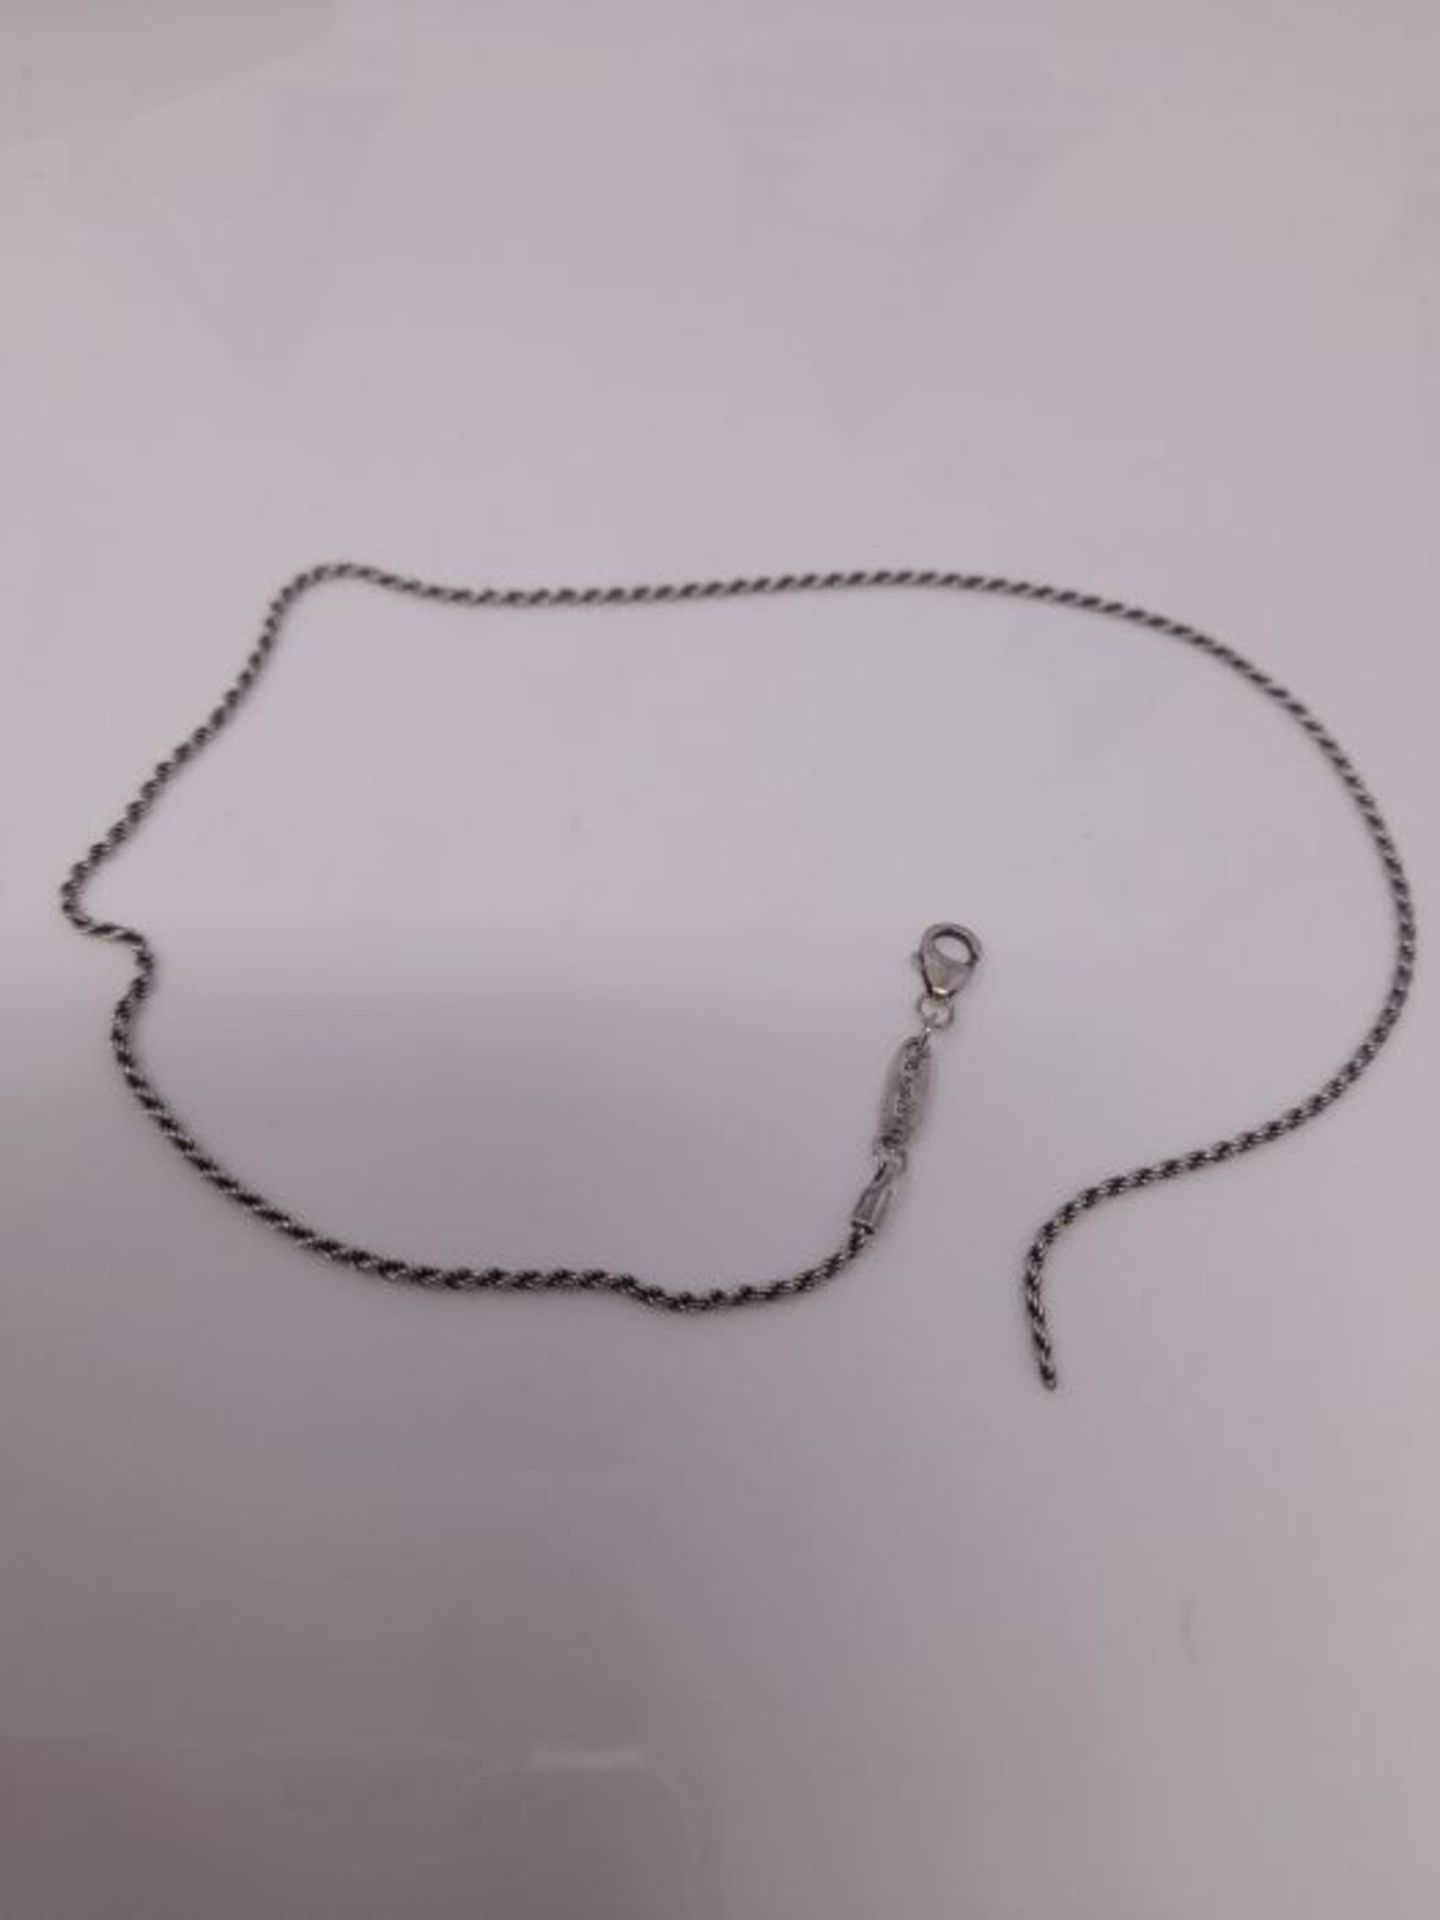 [CRACKED] Thomas Sabo Women's Necklace 925 Sterling Silver Length 40 cm, - Image 3 of 3